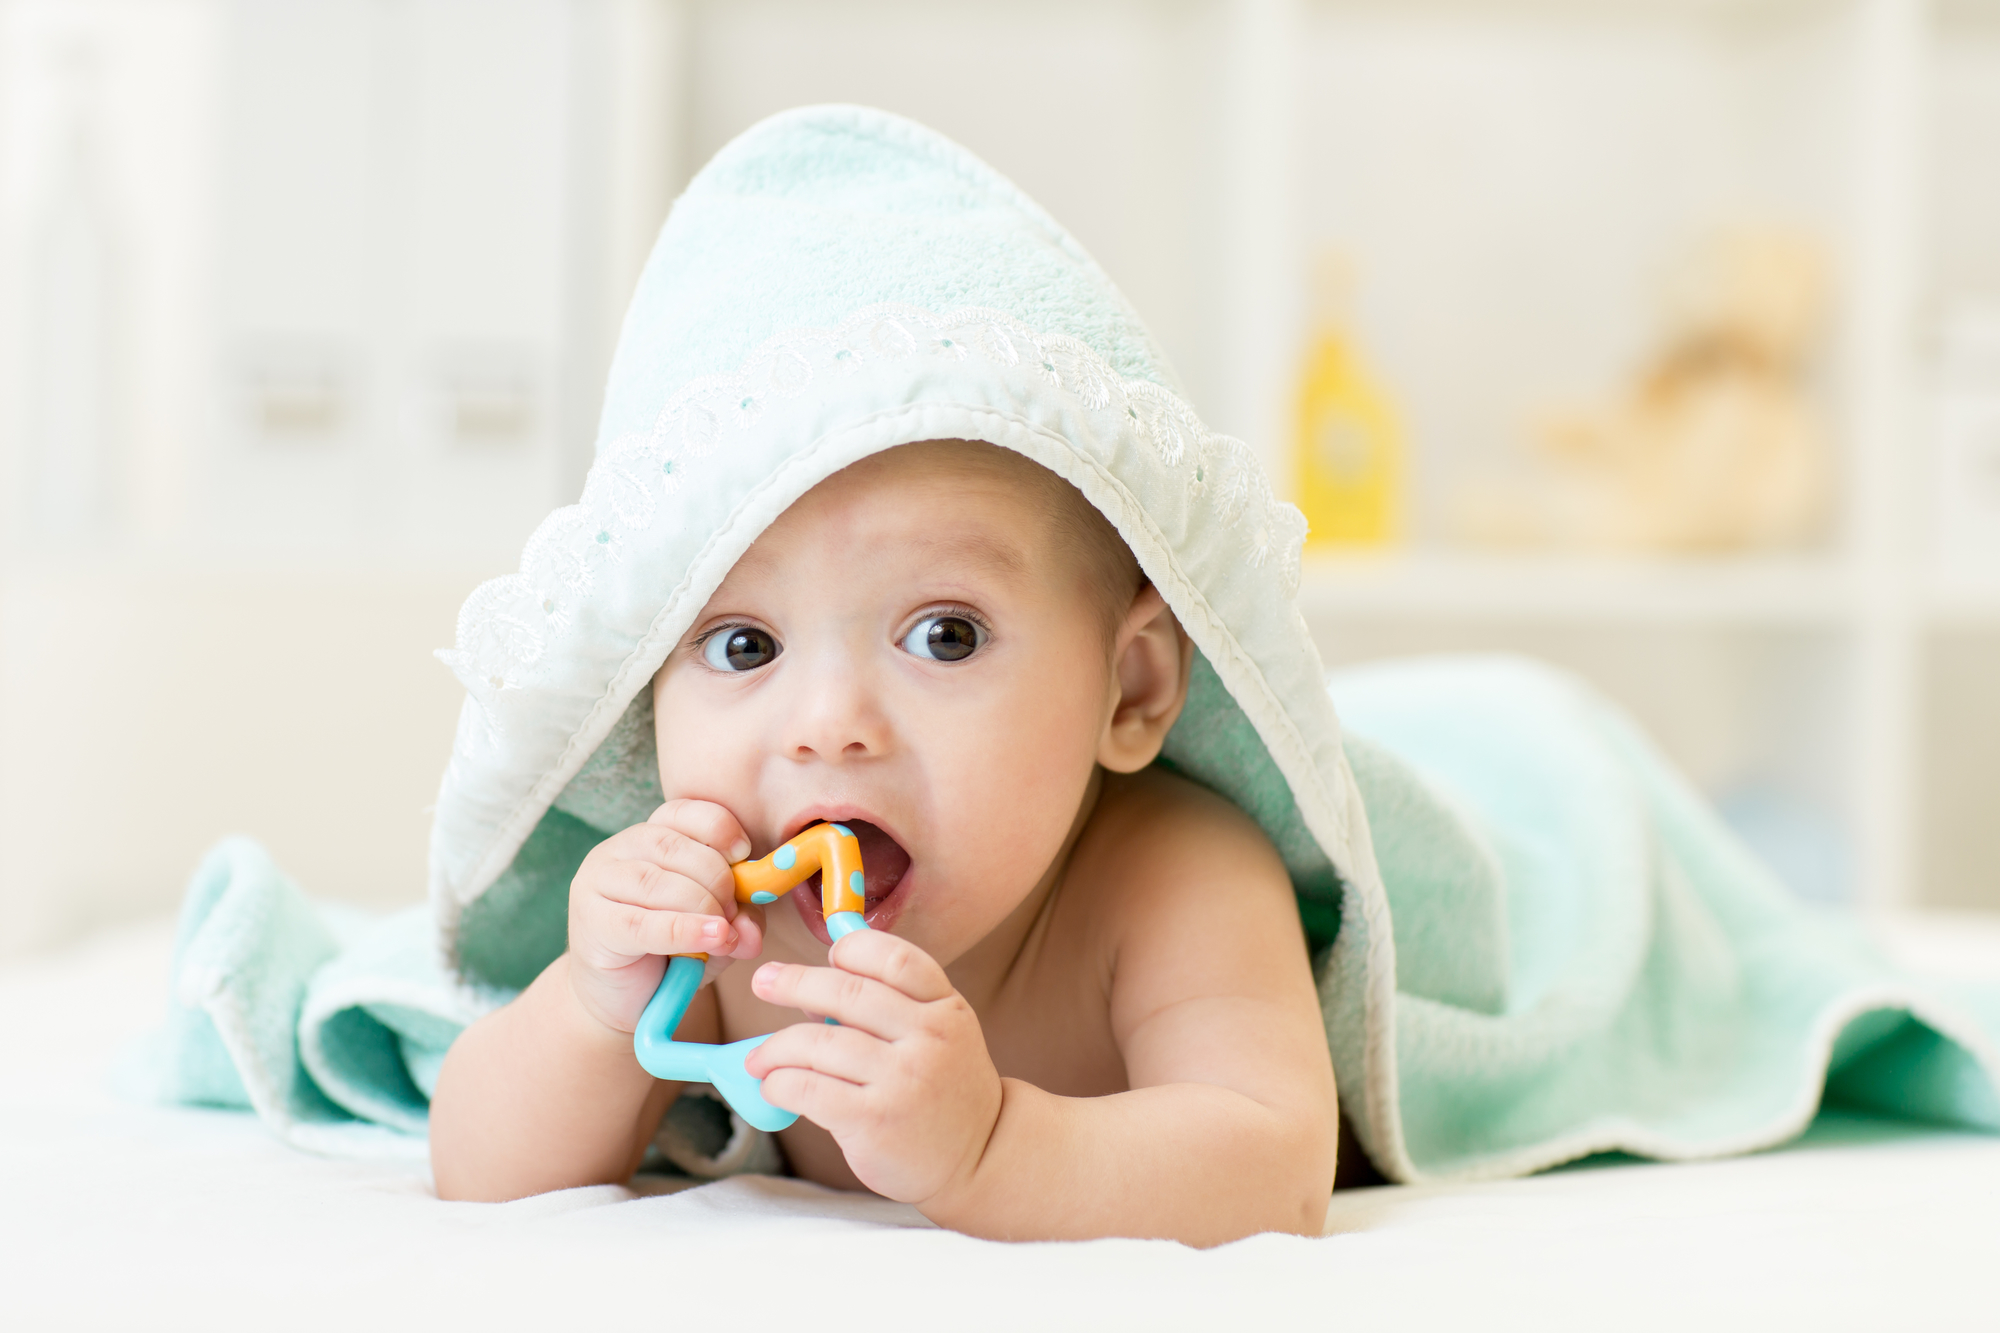 teether for babies disadvantages